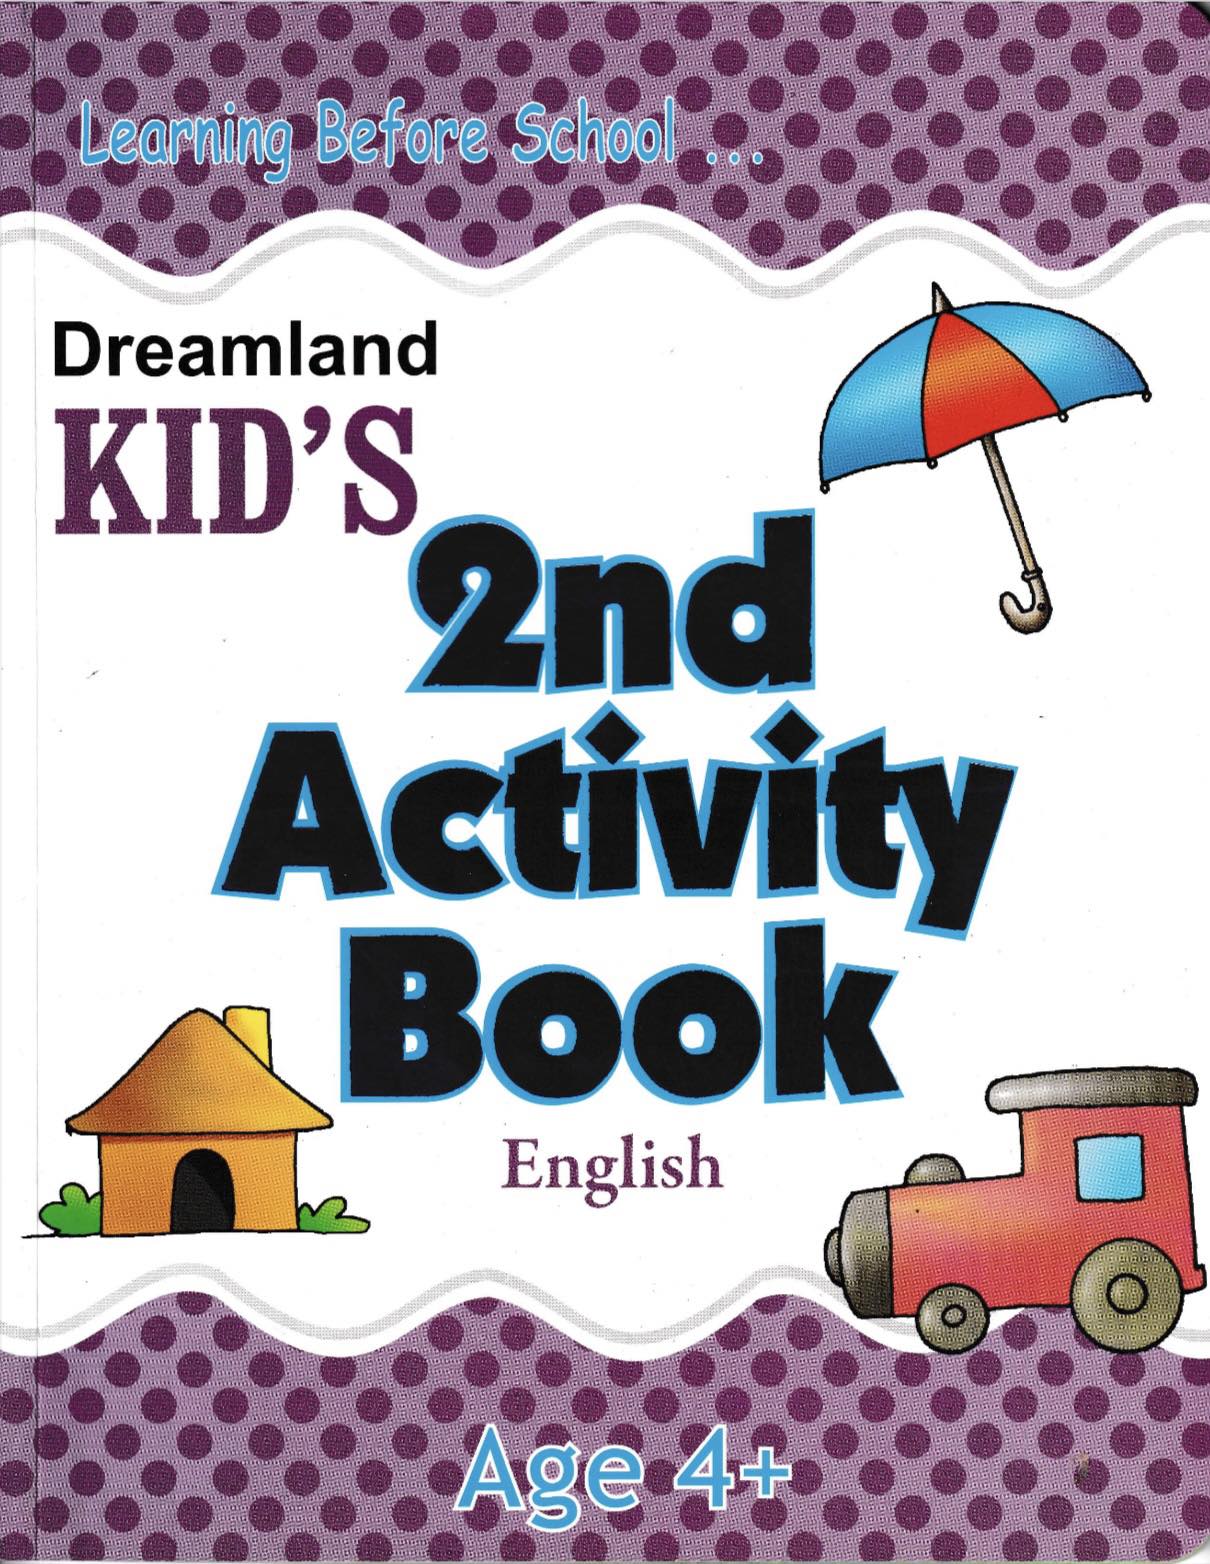 Dreamland Kid's 2nd Activity Book for Age 4+